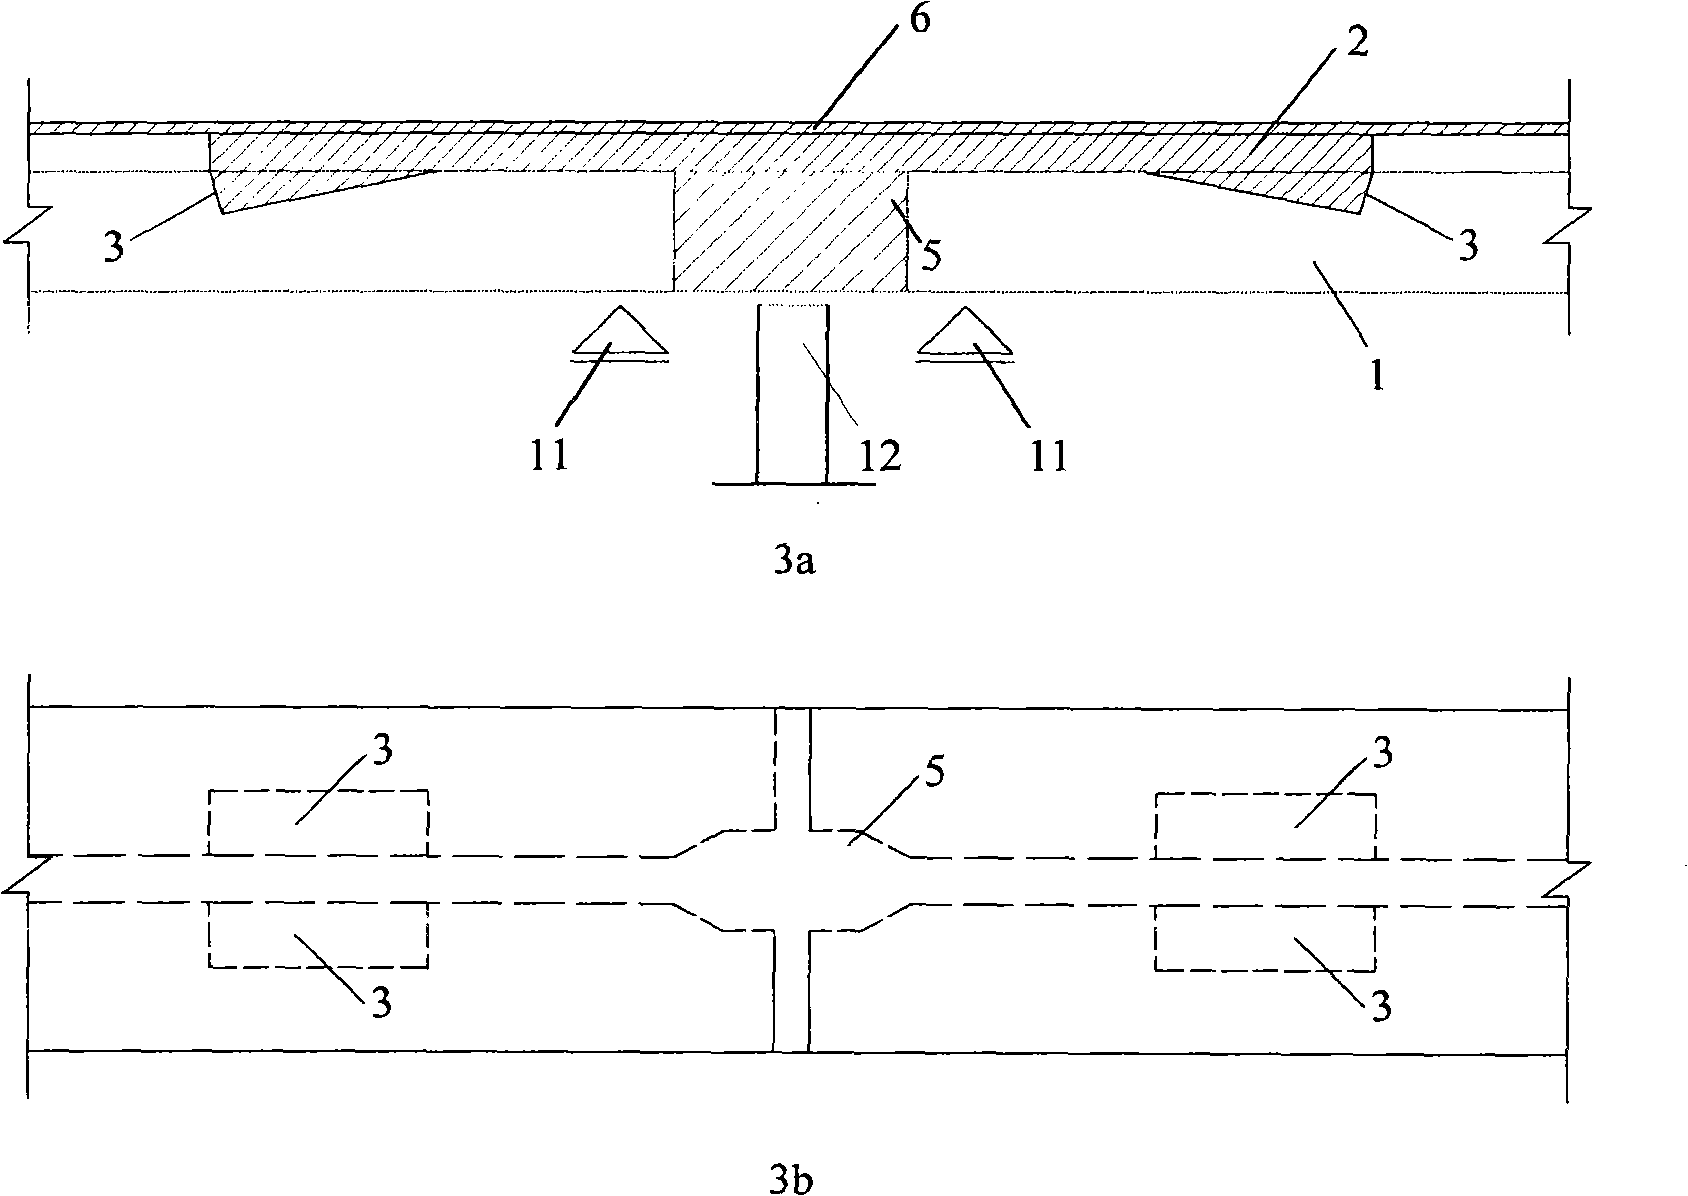 Method for changing old simple supported beam bridge into continuous beam bridge